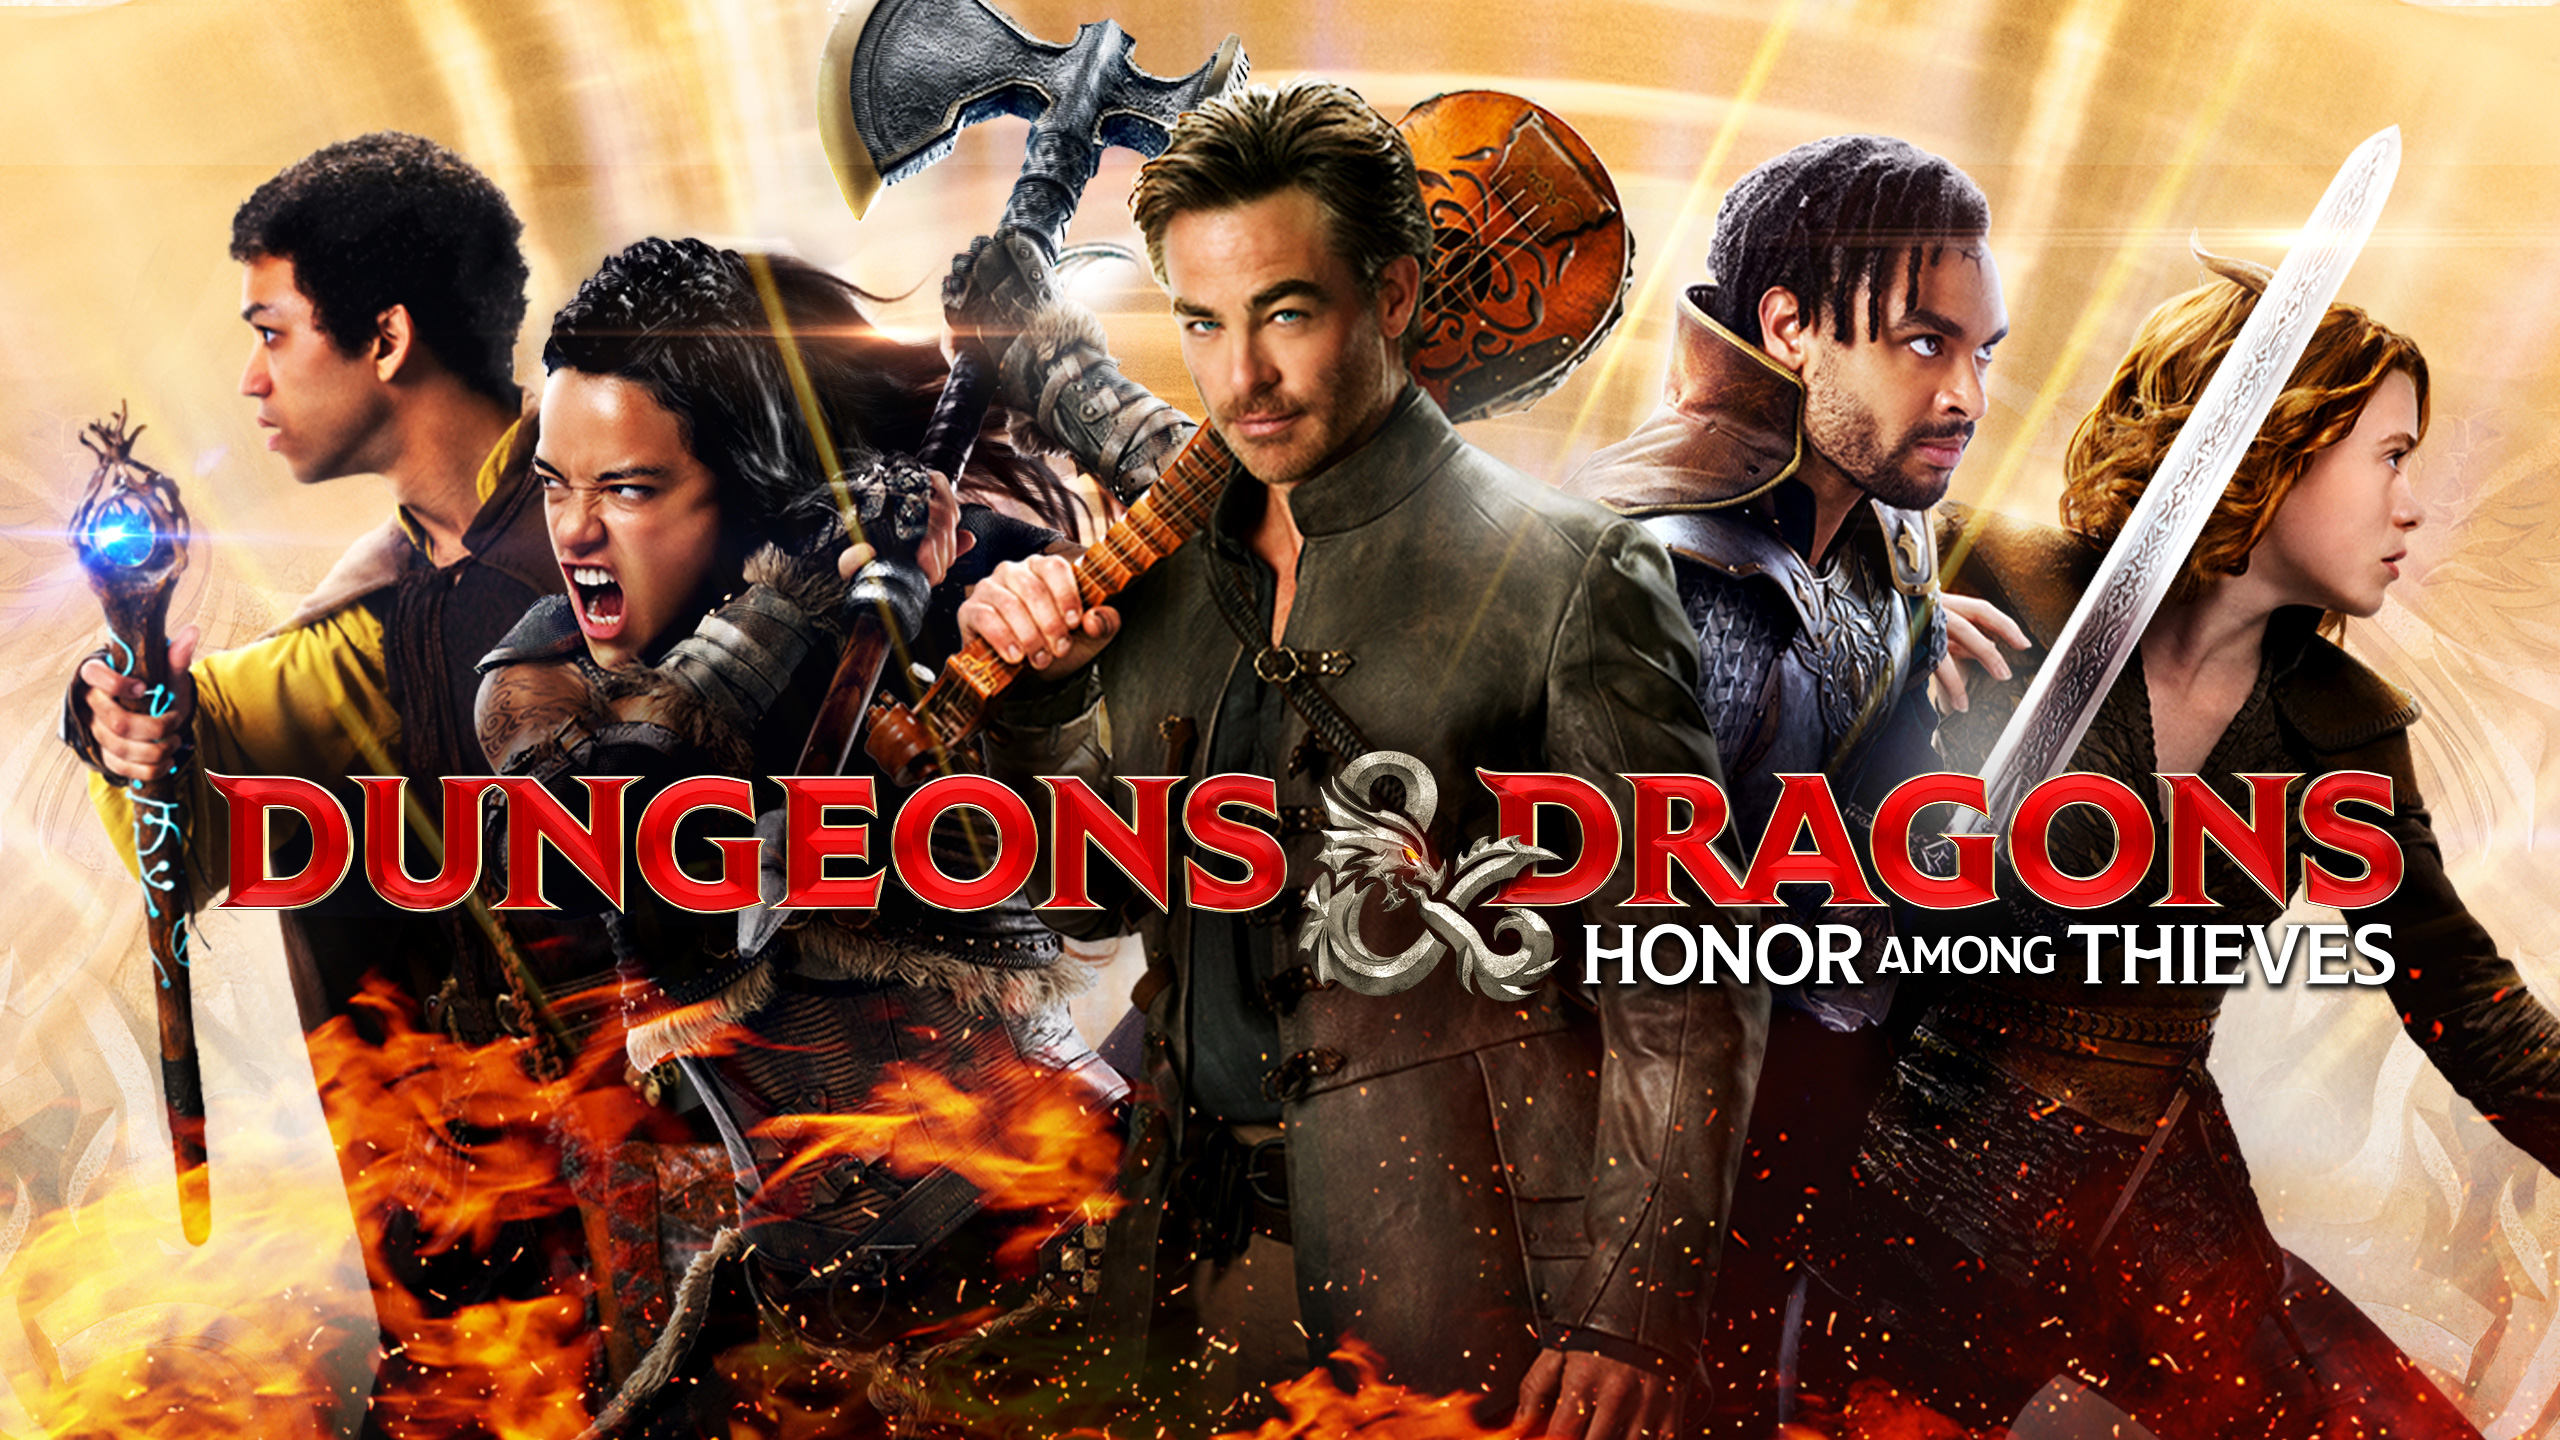 “Dungeons & Dragons: Honor Among Thieves”